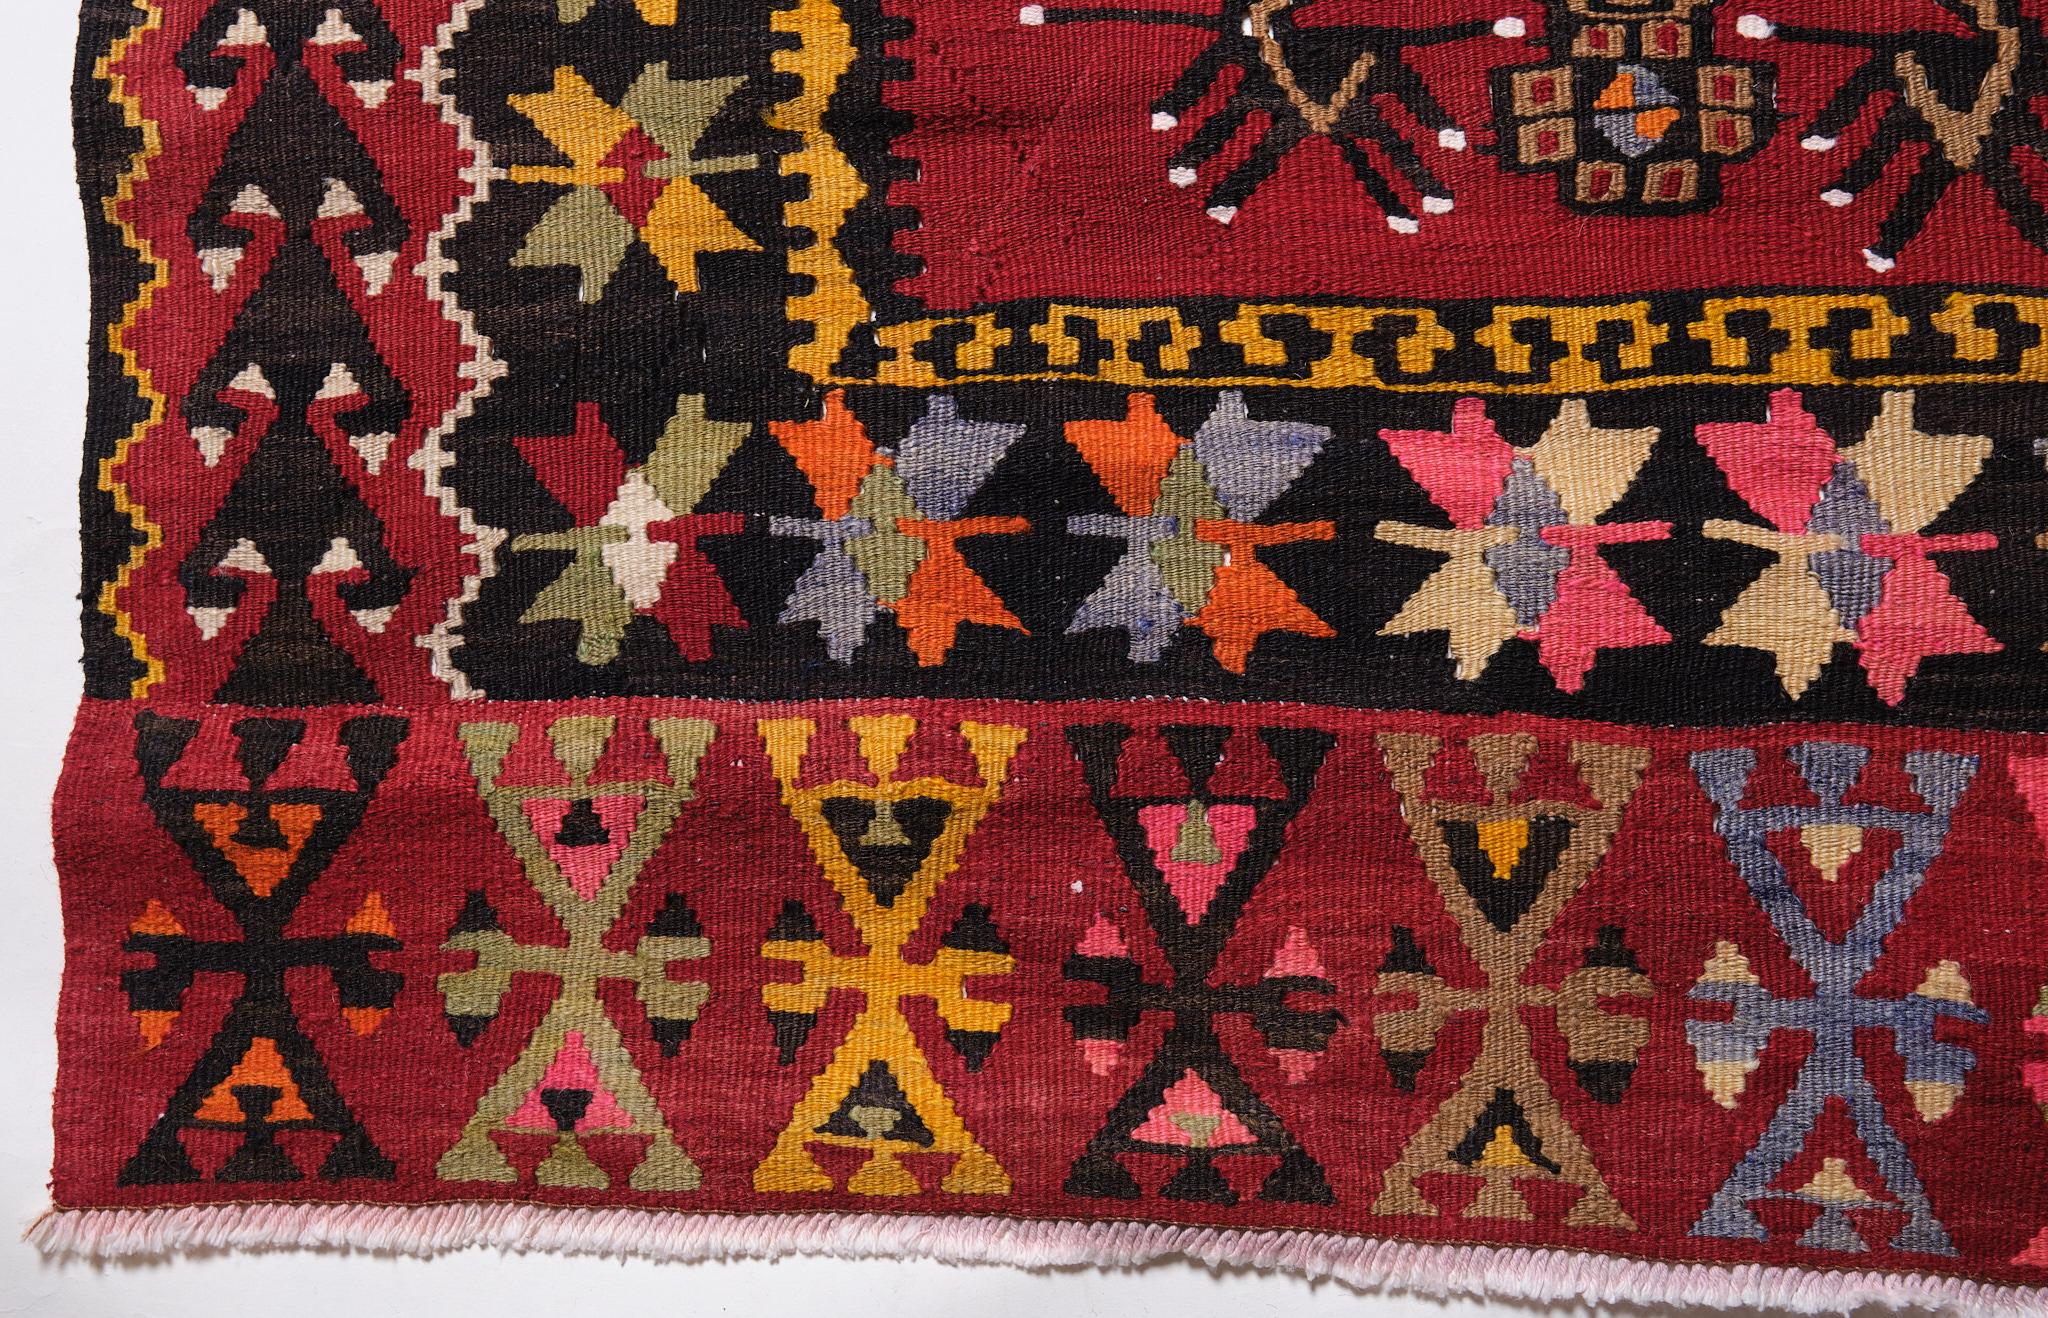 This is a Central Anatolian Old Kilim from the Sarkisla - Sivas region with a rare and beautiful color composition.

Sivas In the third century, Sivas was a Roman city known as Sebastea, the capital of Armenia Minor. Flourishing under Byzantine